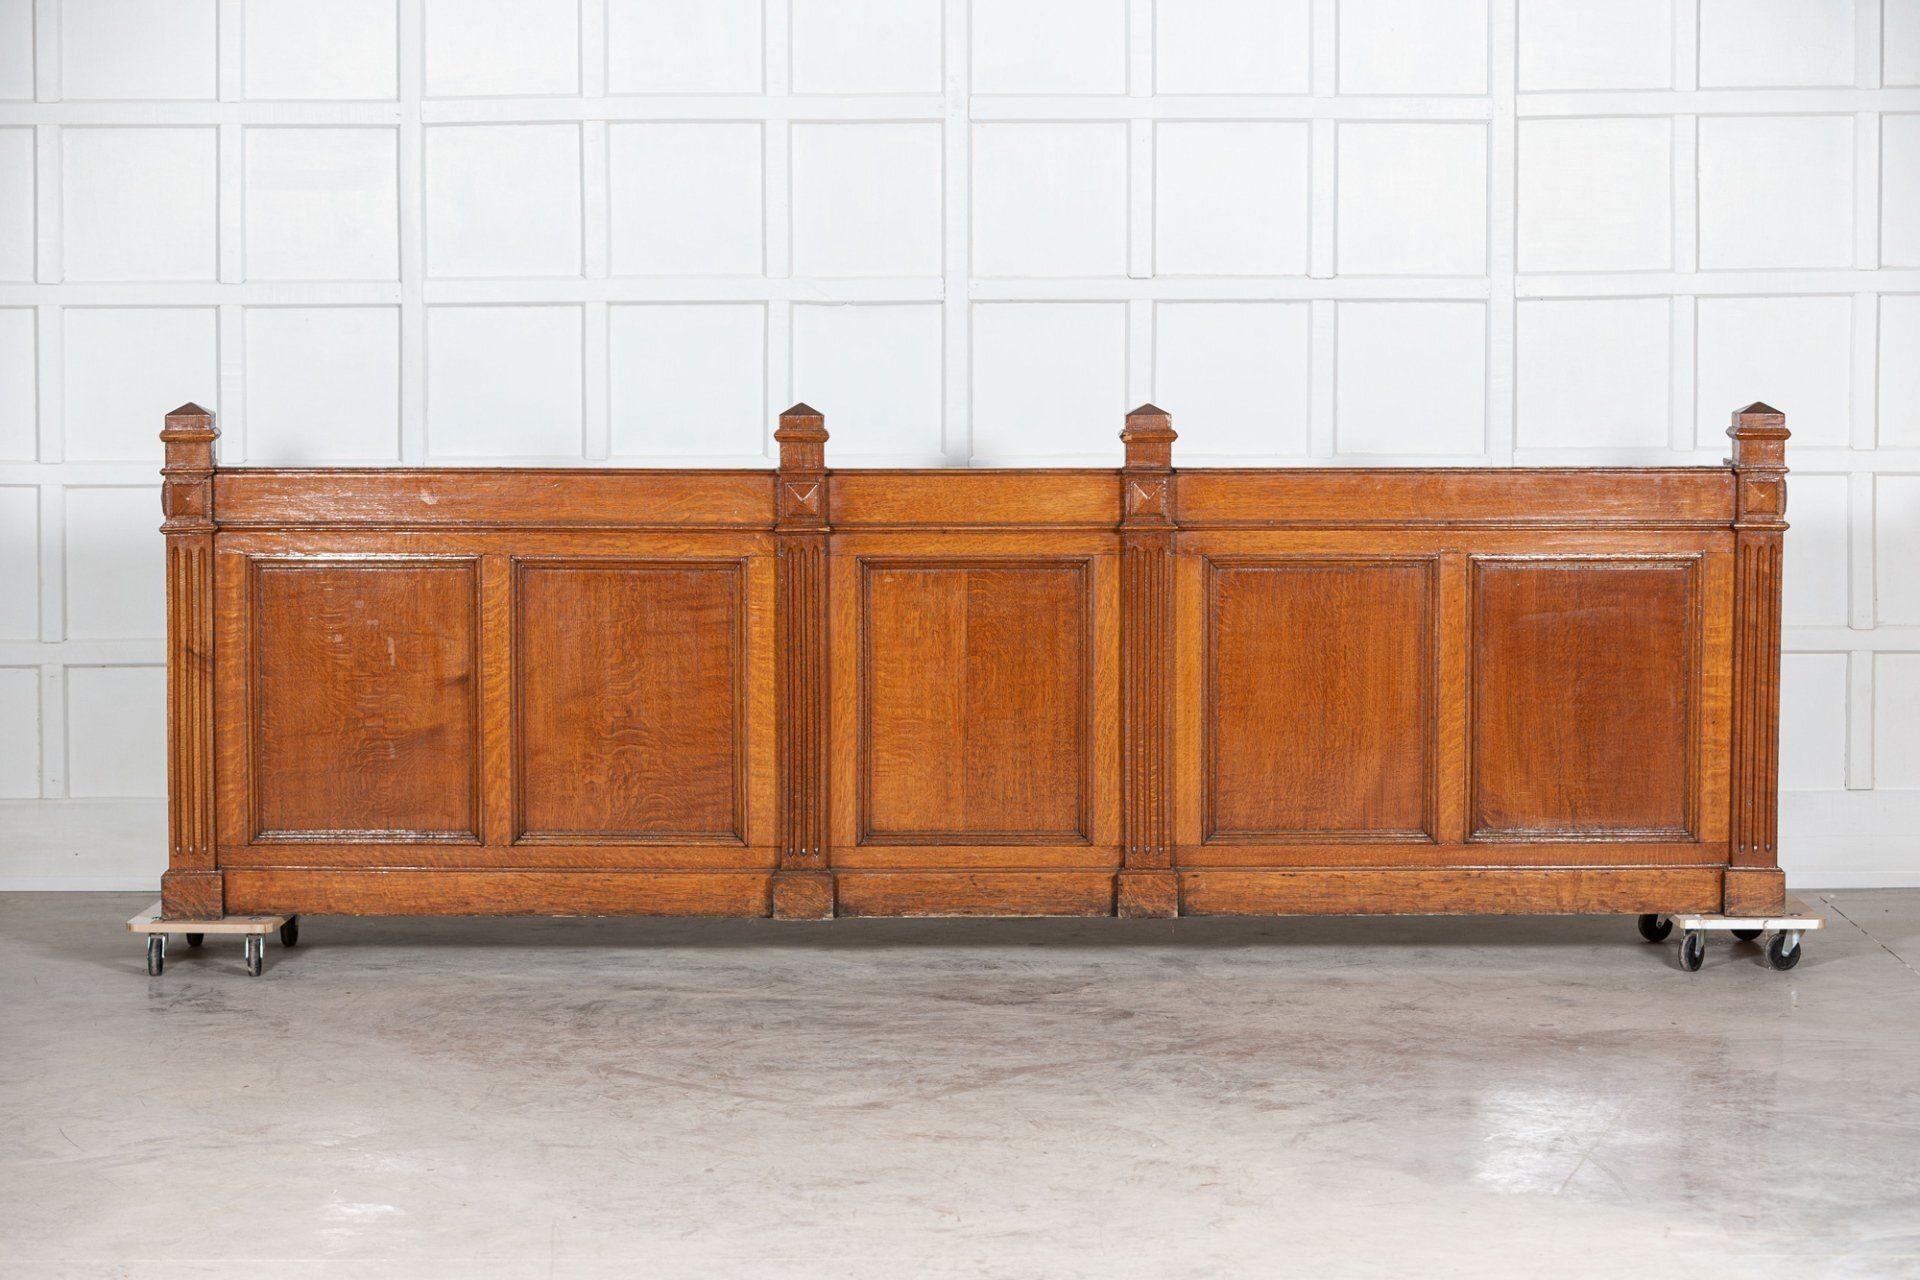 circa 1880
19thC French Oak Bank Counter Desk, the matching Waiting Bench is also available separately
Ideal for a hotel reception or Lobby, restaurant etc
Provenance: Caisse d'Epargne Cooperative Bank - Tienen City France
sku 1205
W329 x D45 x H104